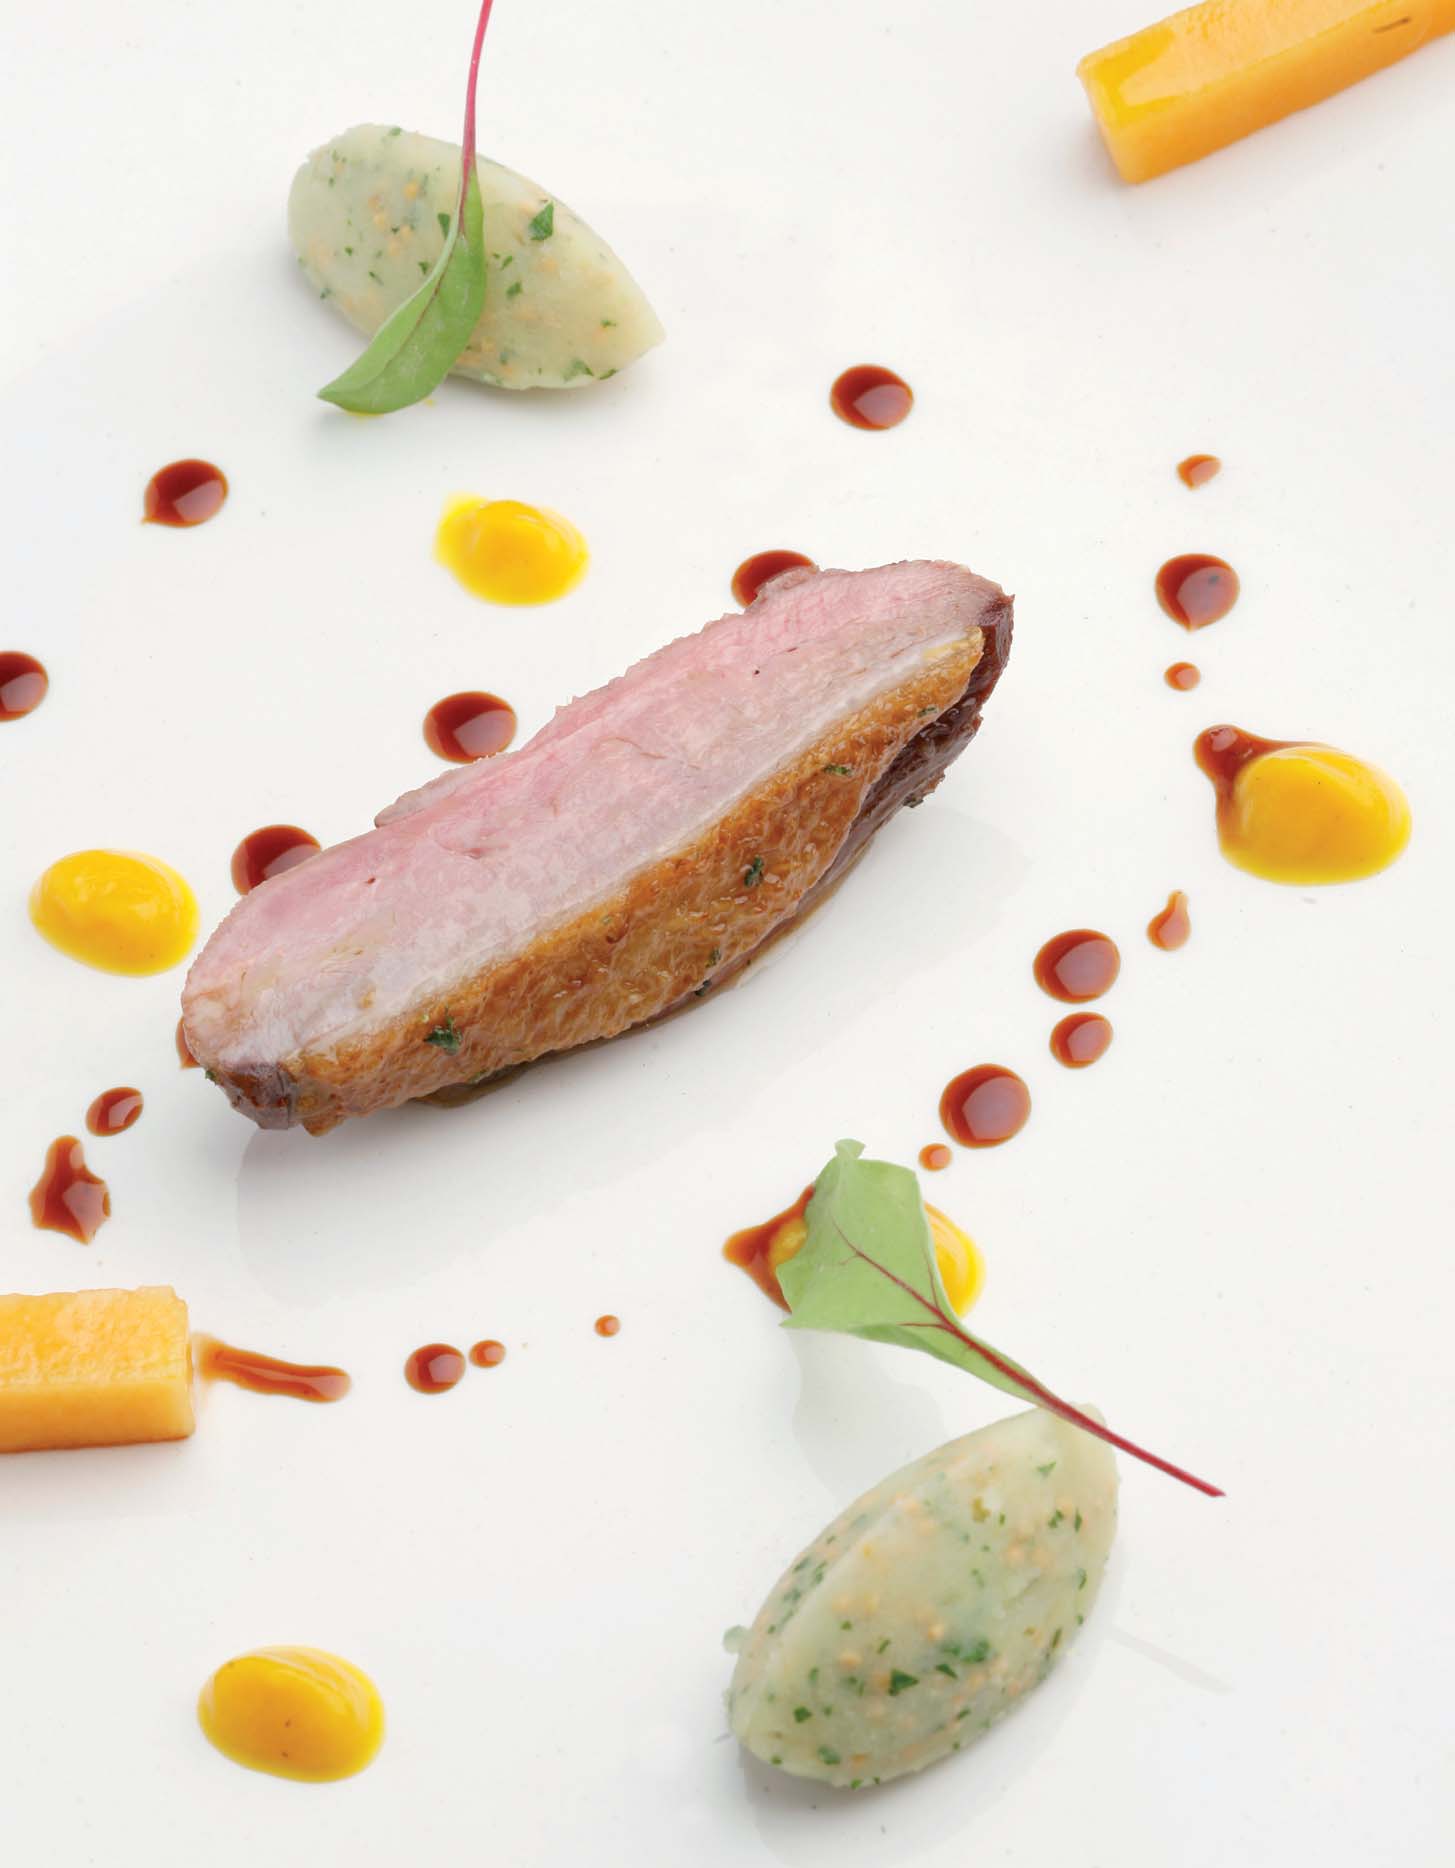 Glazed duck with Palo de Mallorca and spices, a pumpkin sauce and potatoes with mustard seeds - Recipes - Gastronomy - Balearic Islands - Agrifoodstuffs, designations of origin and Balearic gastronomy